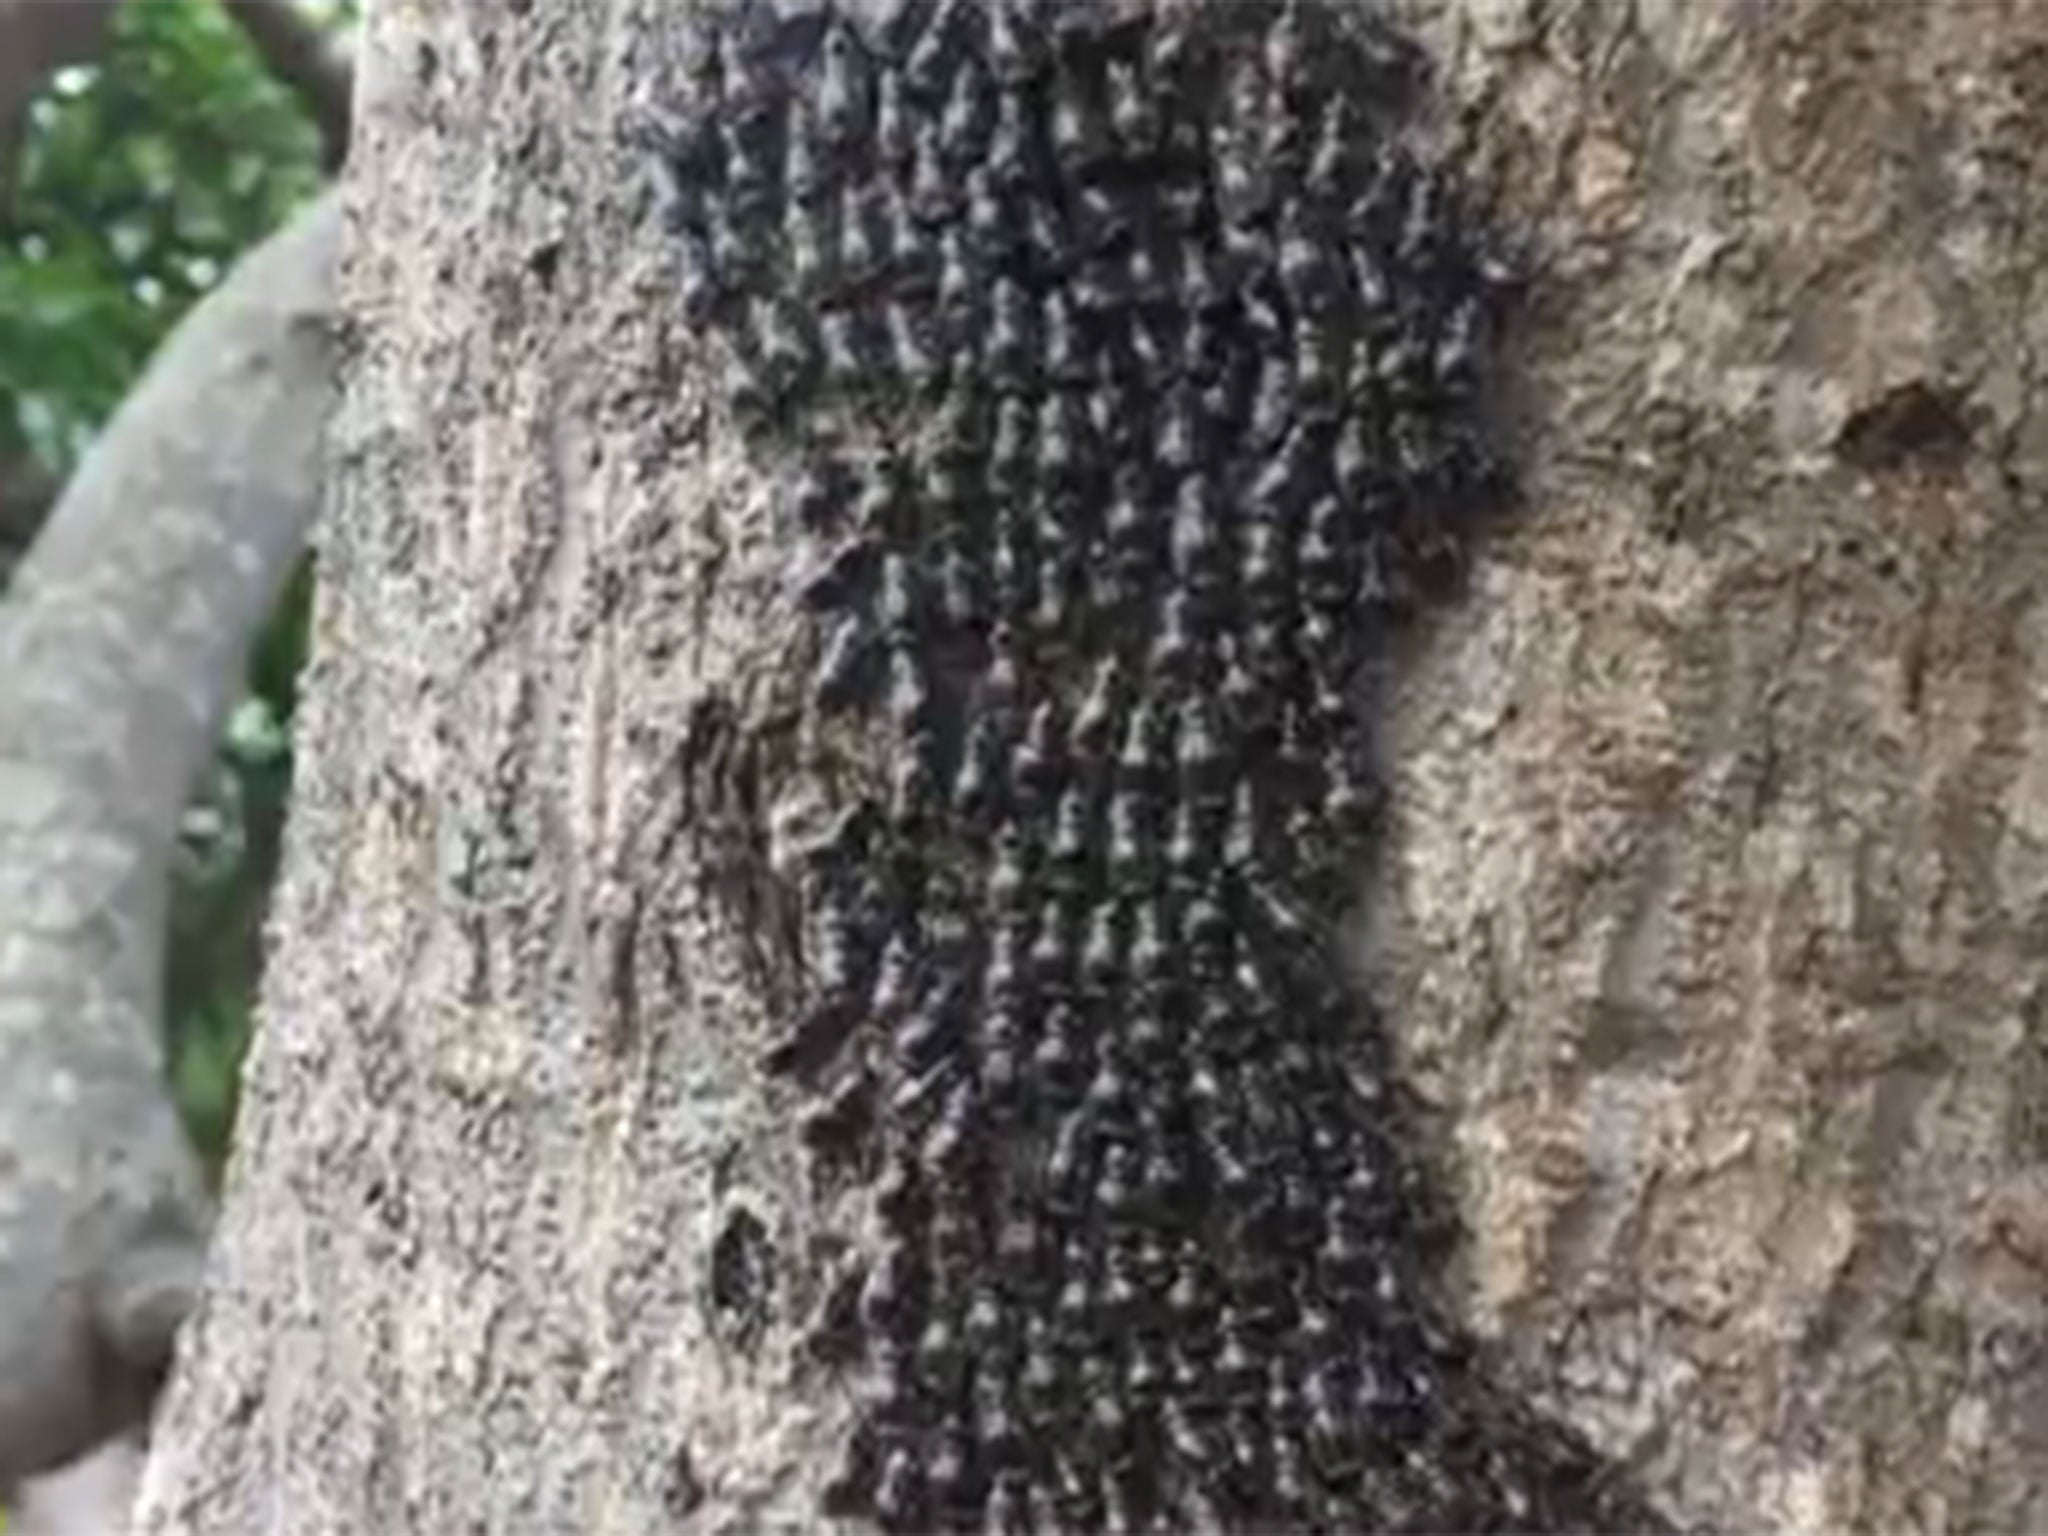 Thousands of gregarious spotted cockroach nymphs crawling up the tree